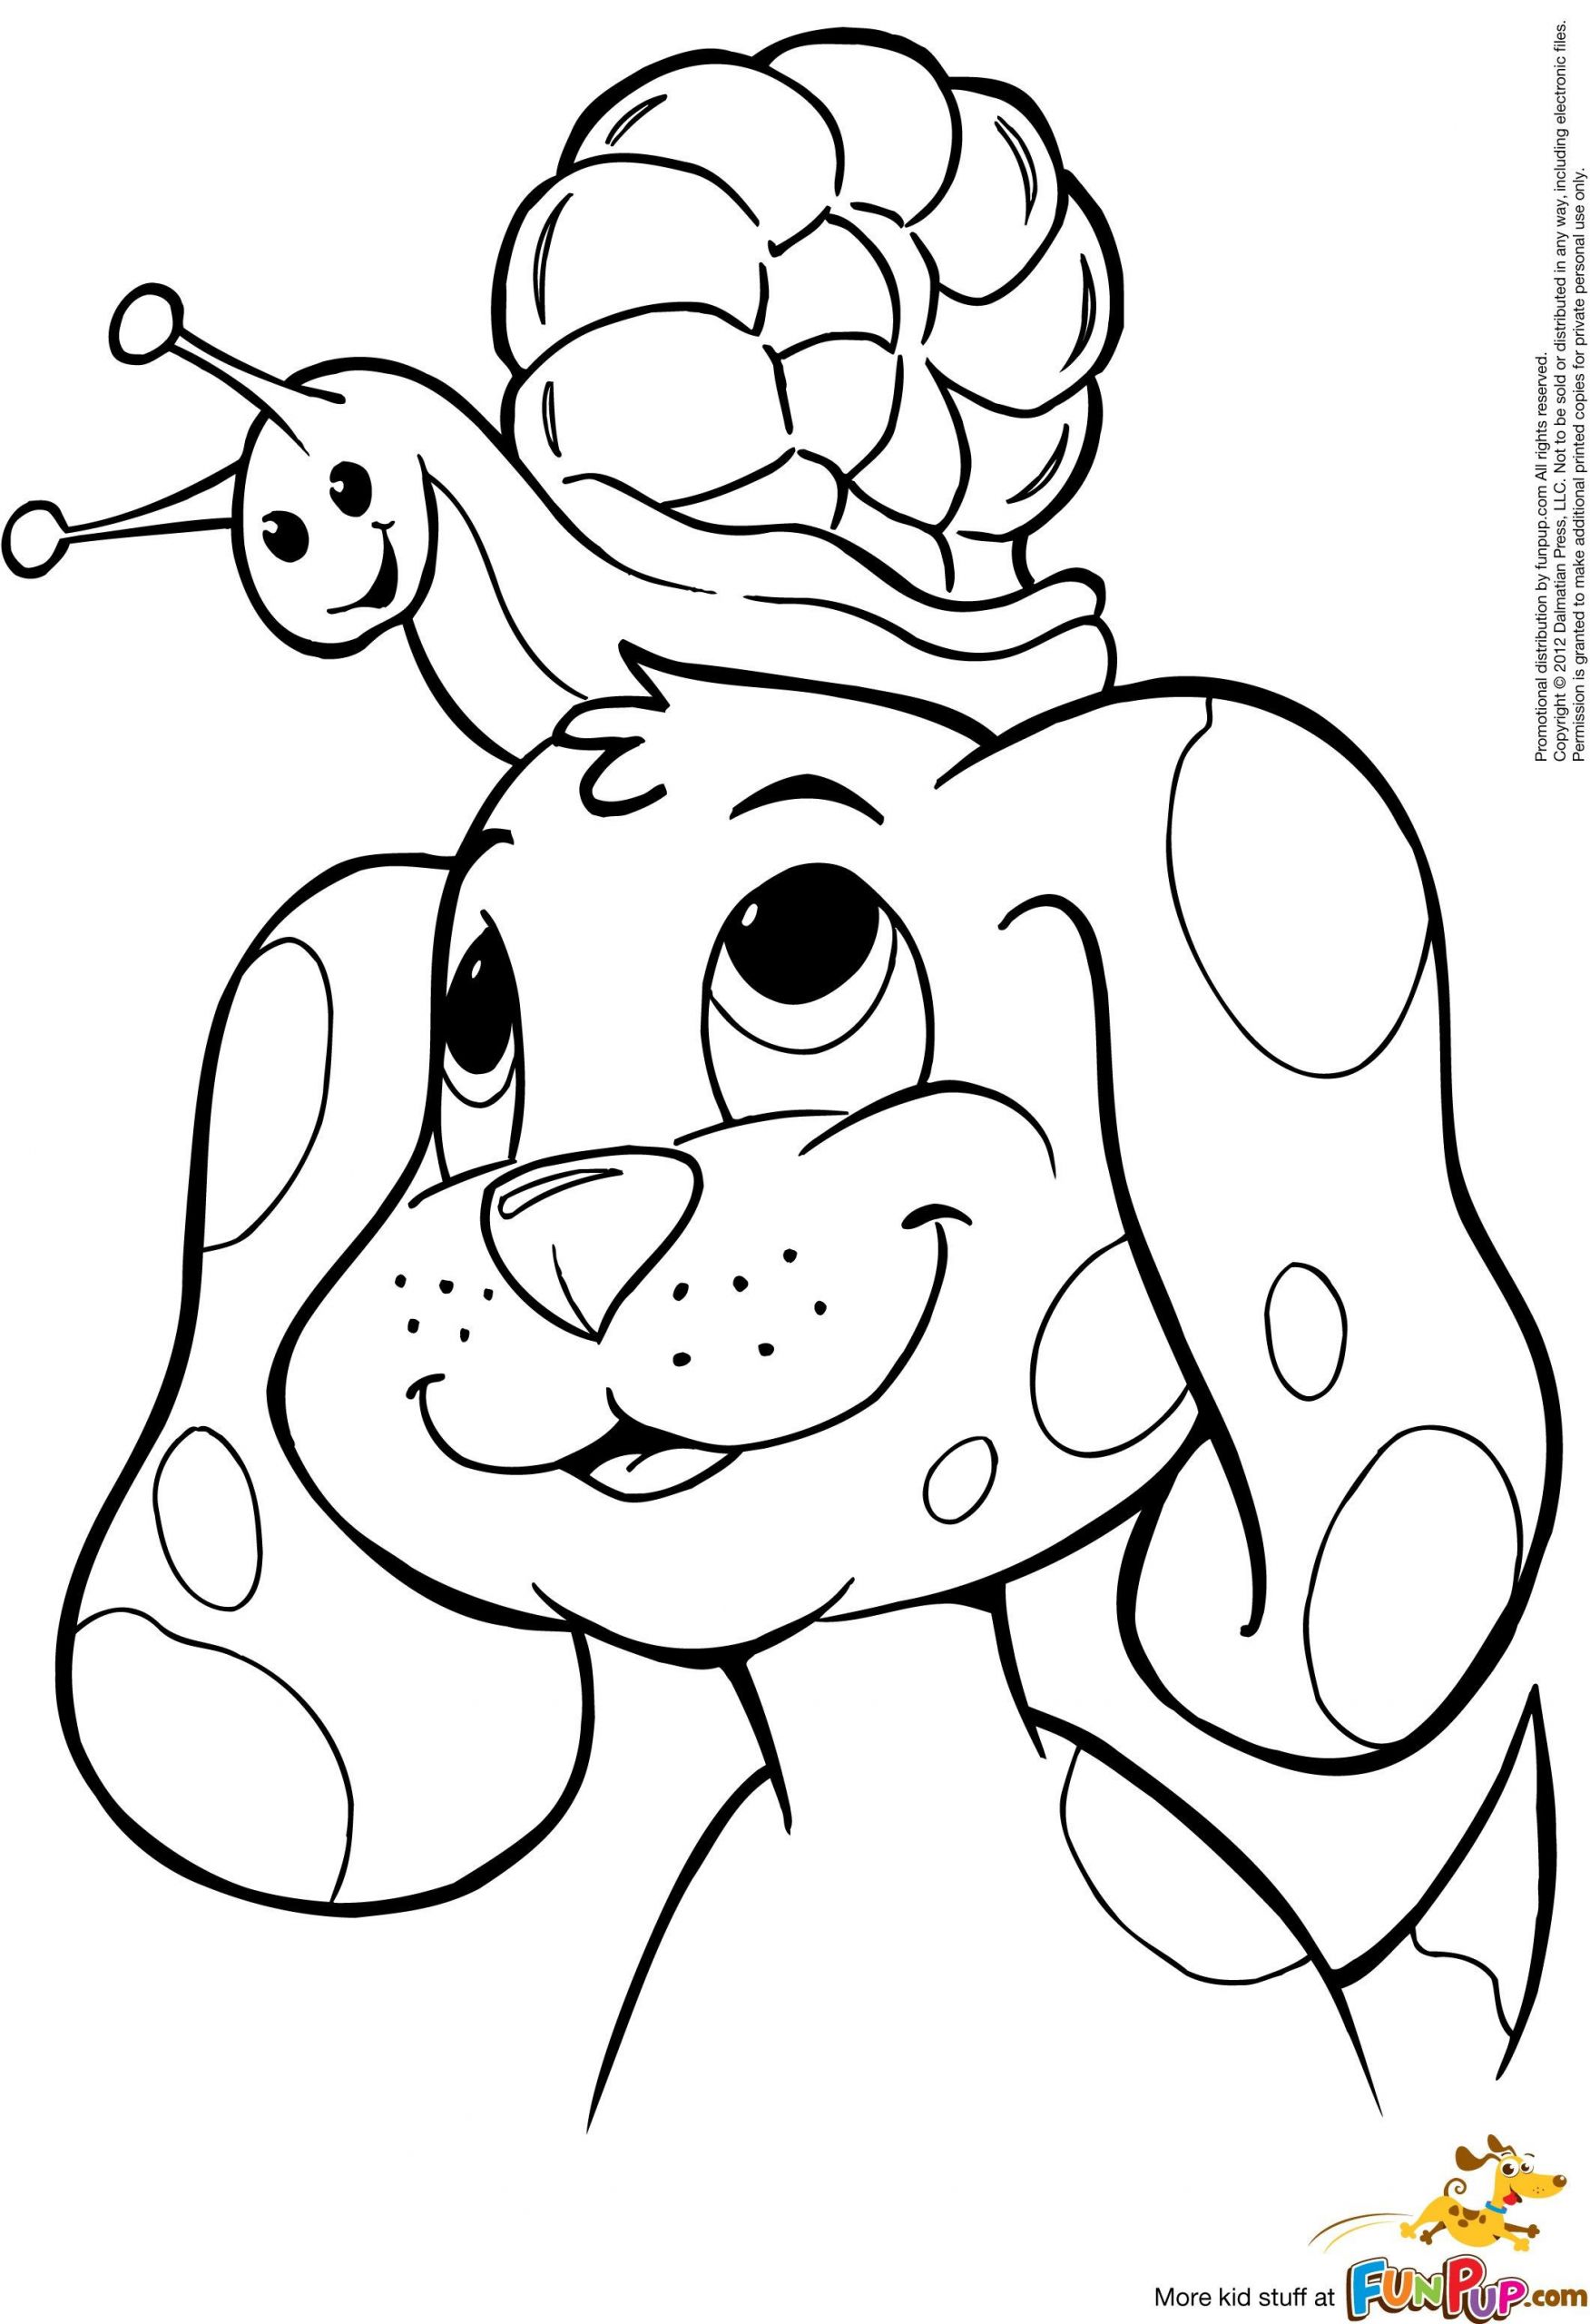 Printable Puppy Coloring Pages
 Puppy 1 0 colouring pages Clip Art Miscellaneous